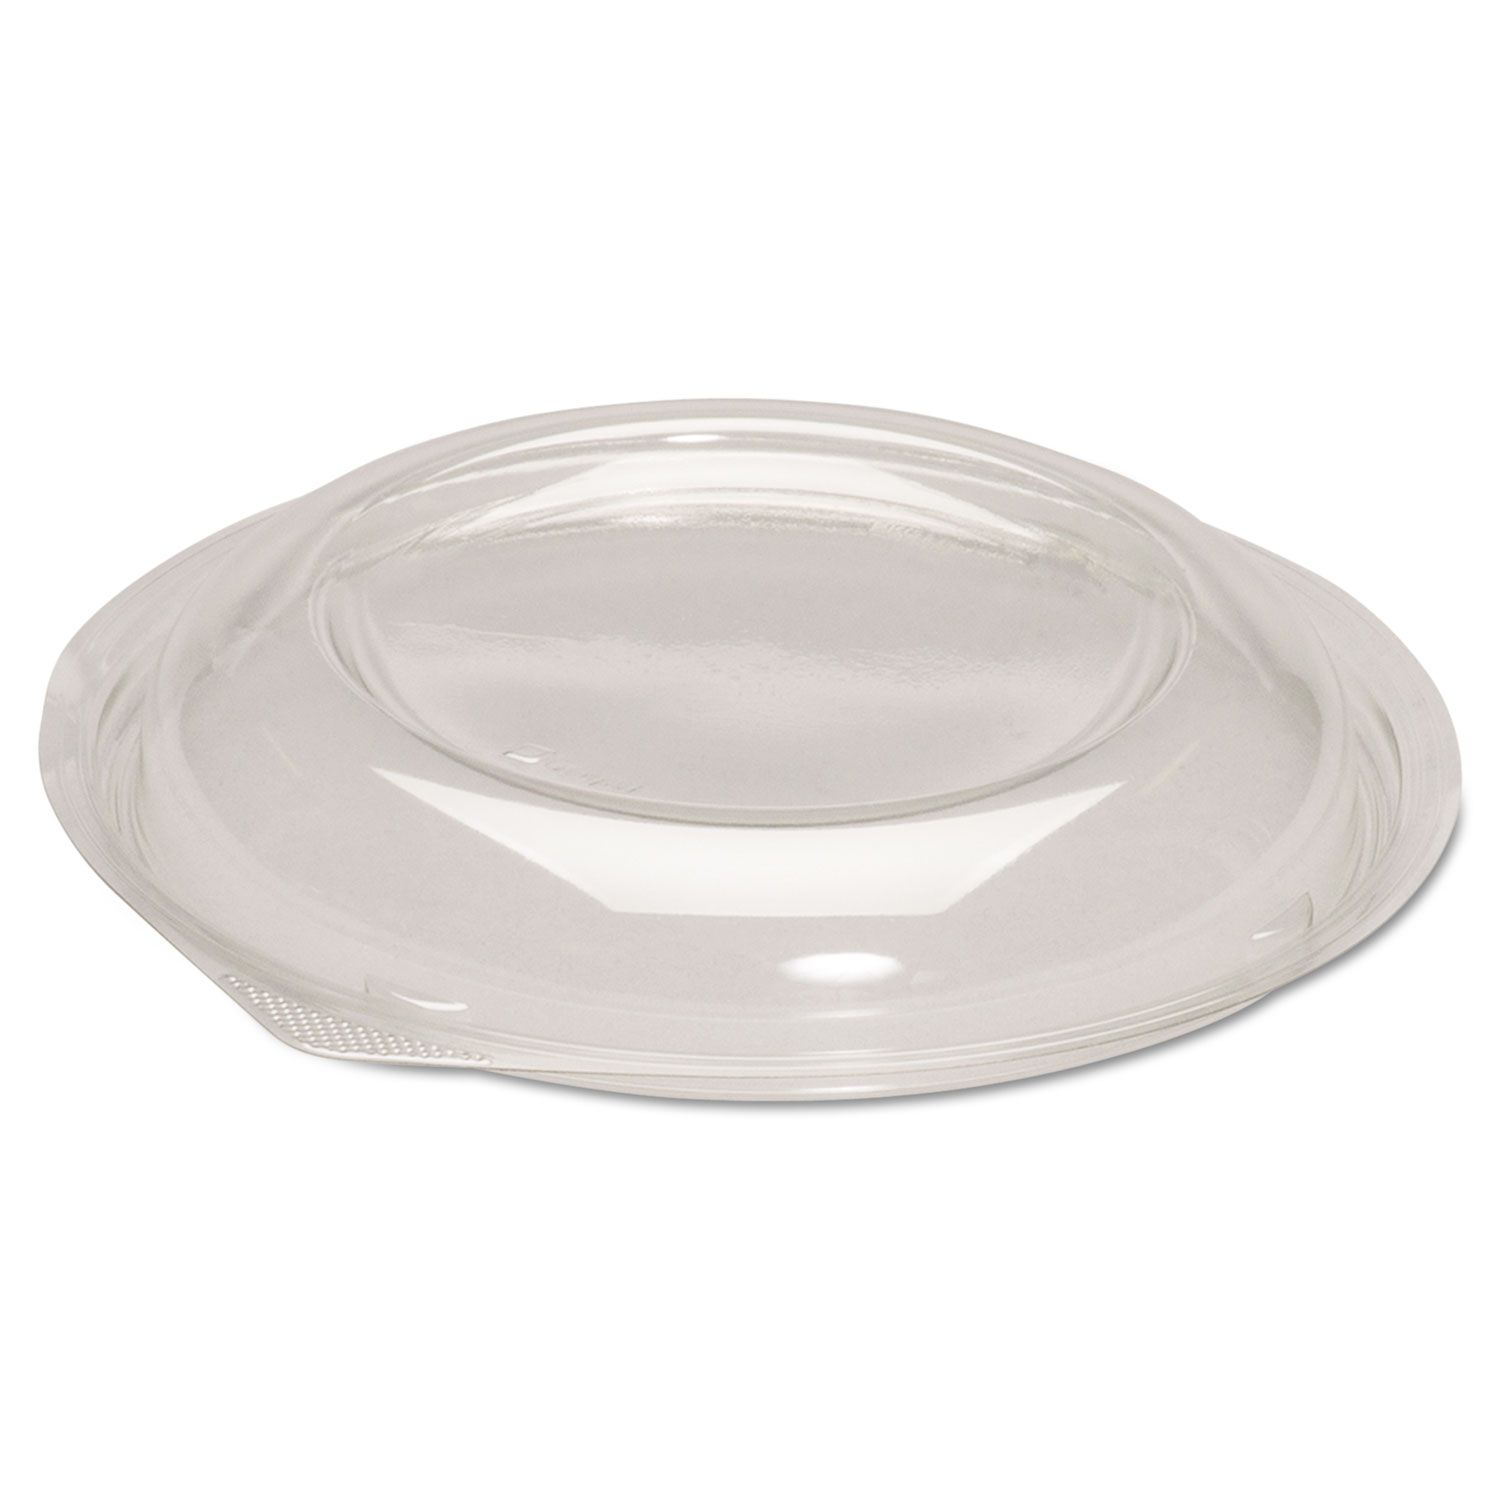  Genpak BWS932--- Dome Lids for Silhouette Plastic Bowls, Clear, For 24-32oz Bowls, 200/Ct (GNPBWS932) 